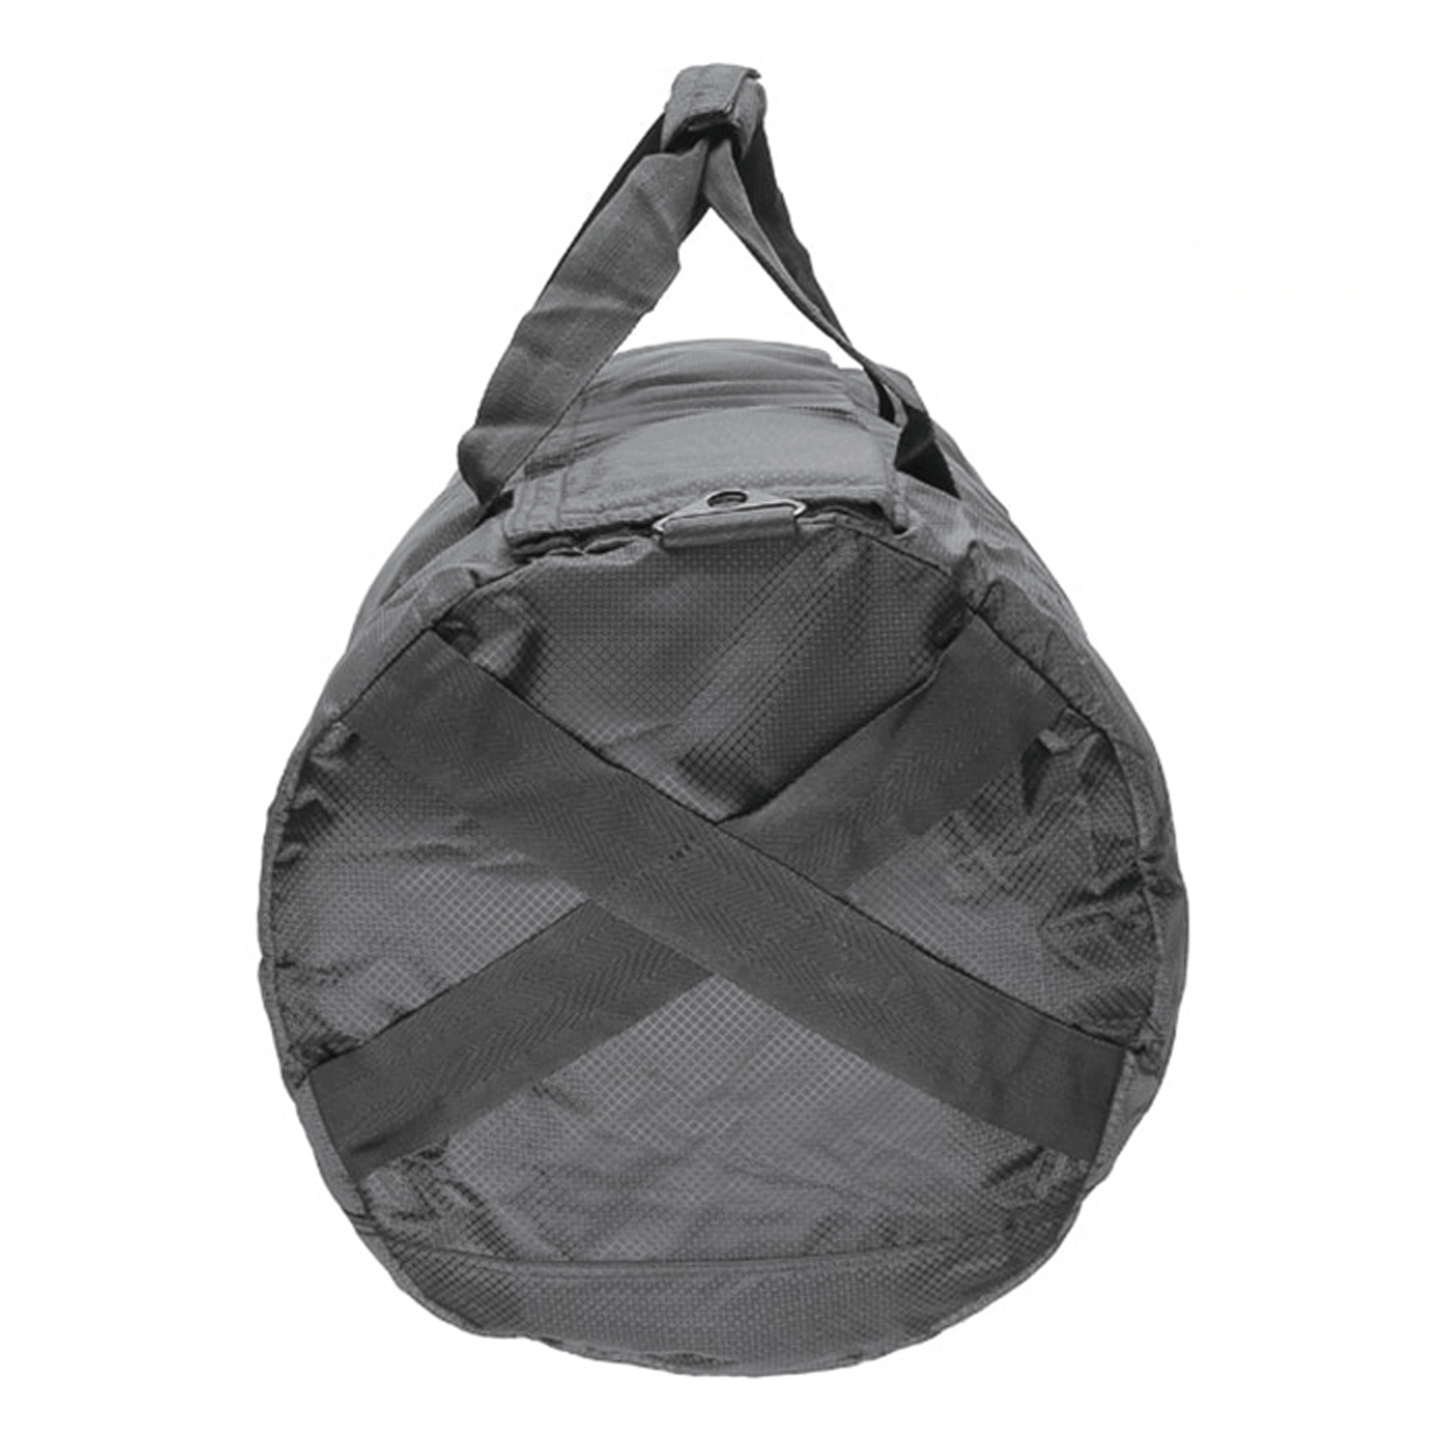 AWOL DAILY XX-Large Ripstop Black Duffle Bag 886132 Harvest & Extraction 859097007214